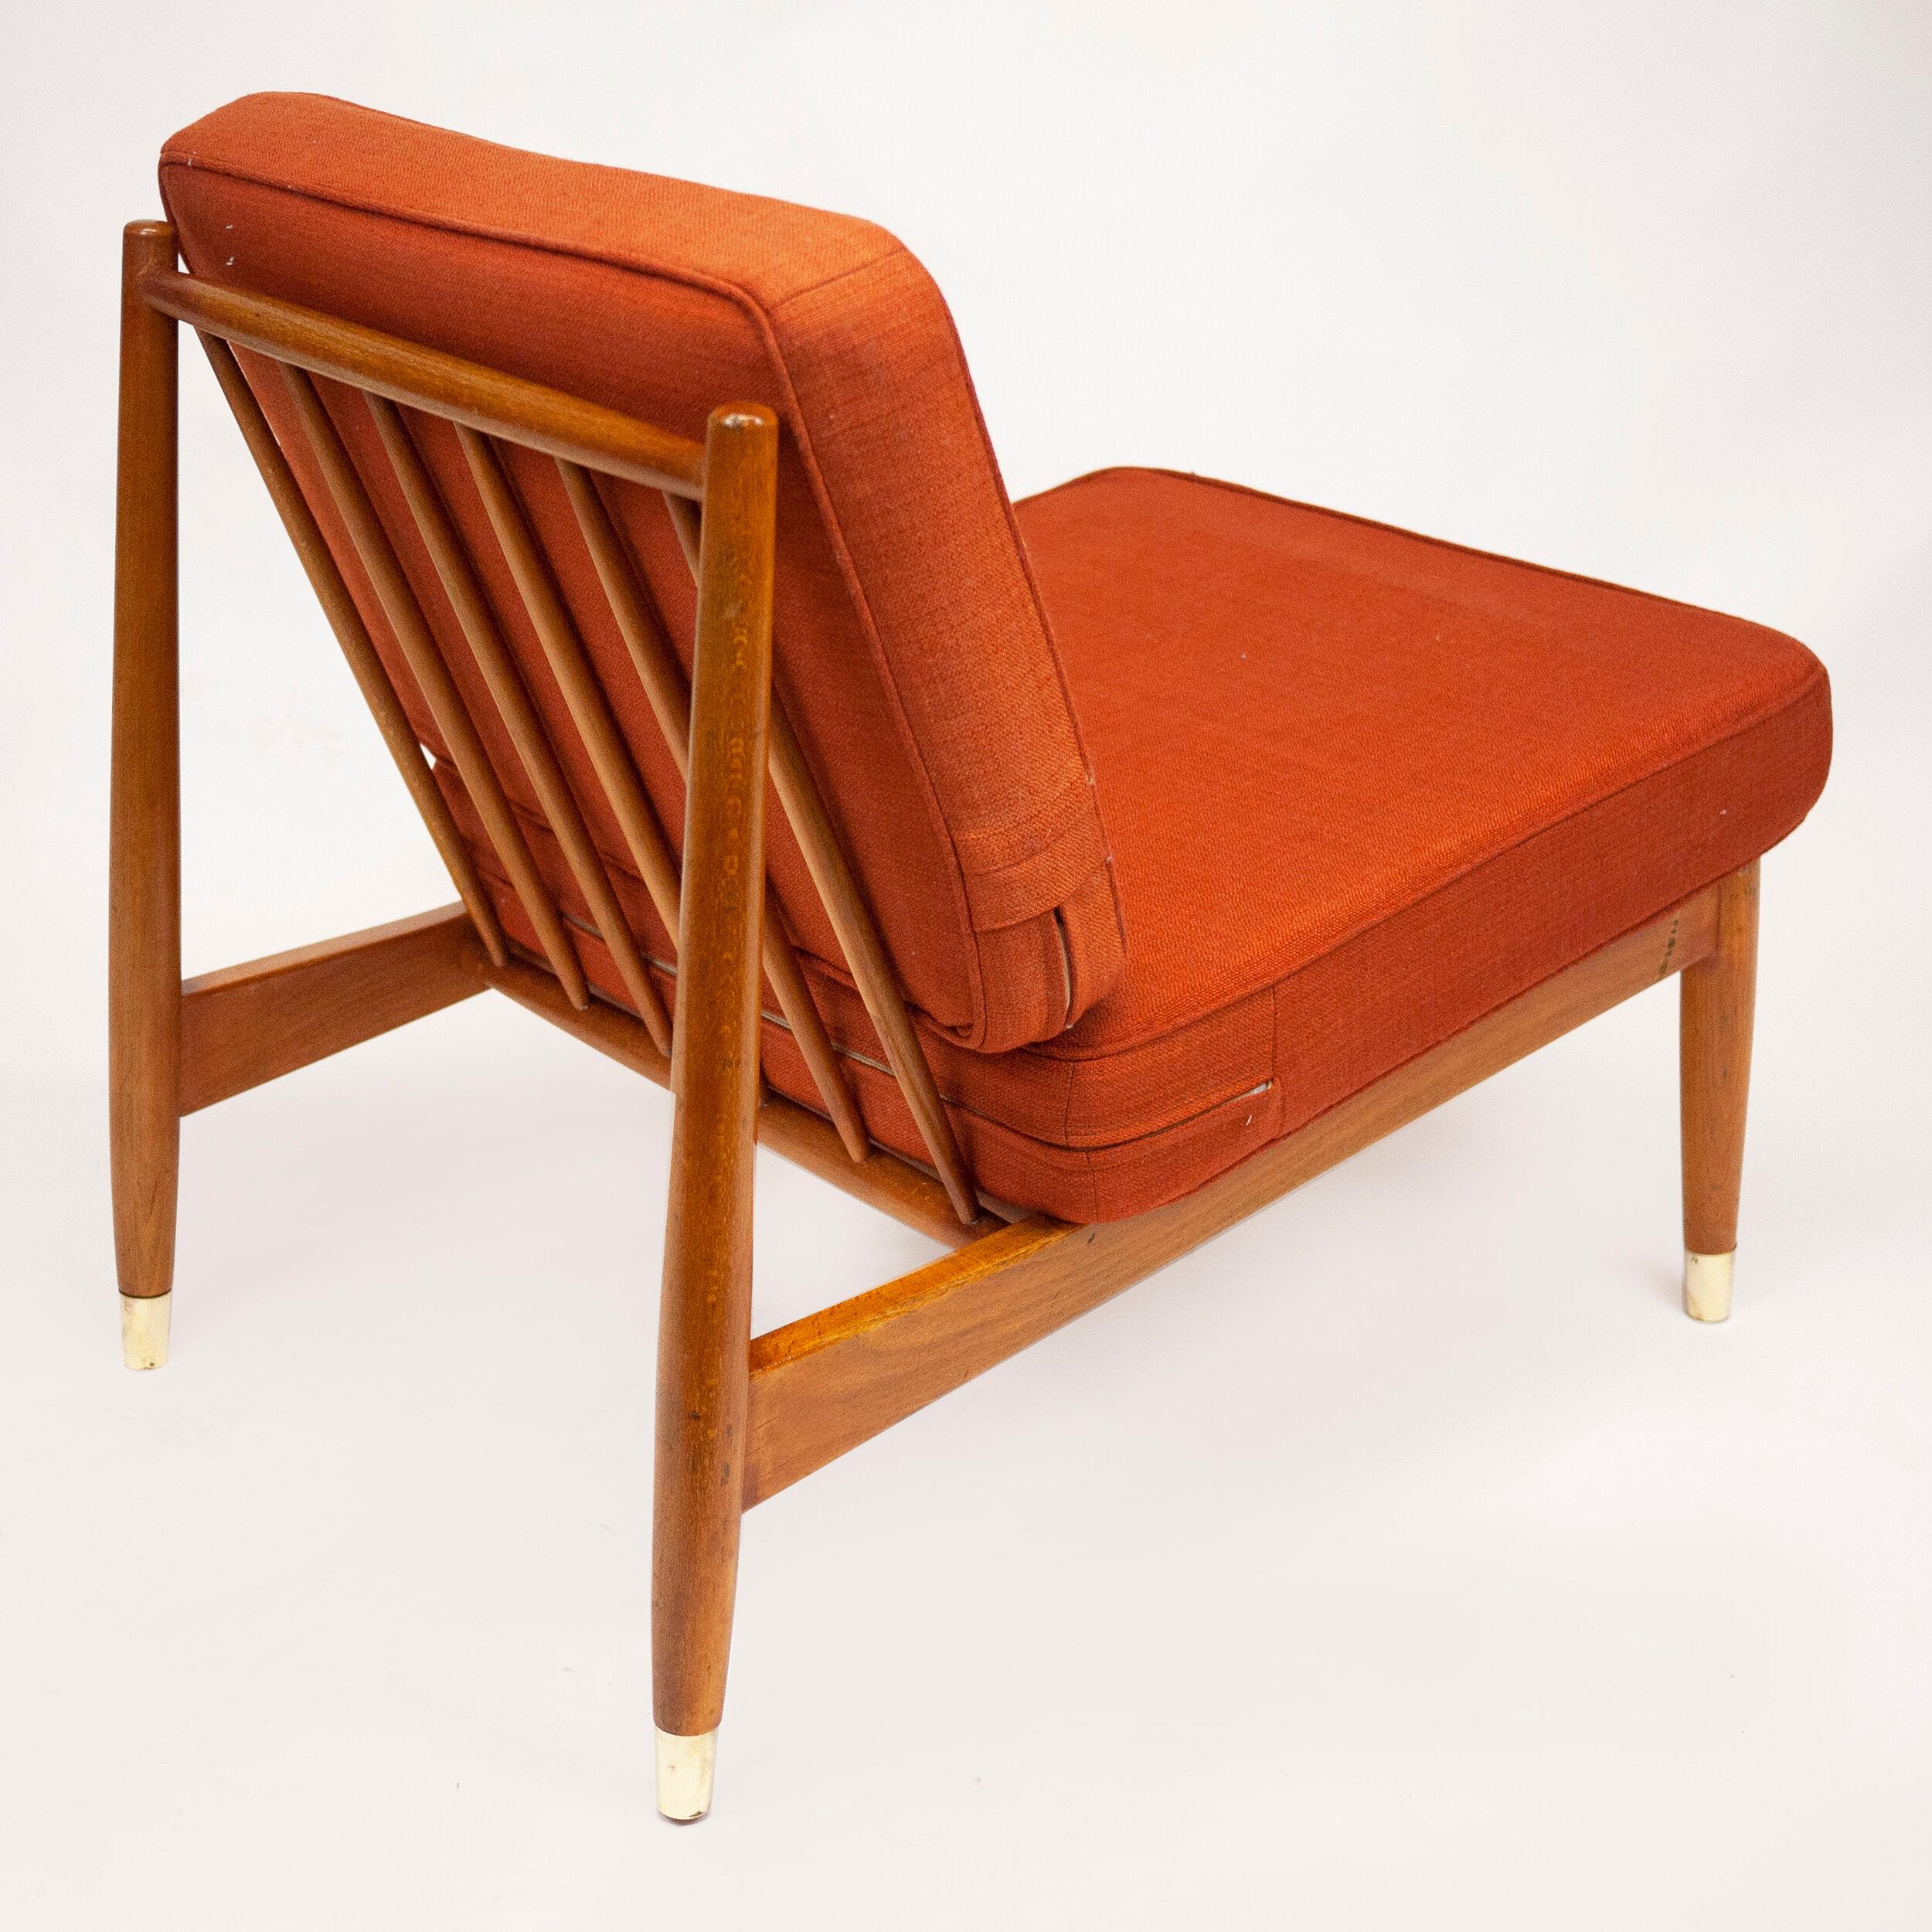 Swedish Beech Low Lounge Chair by Folke Ohlsson for Dux, 1960s For Sale 3